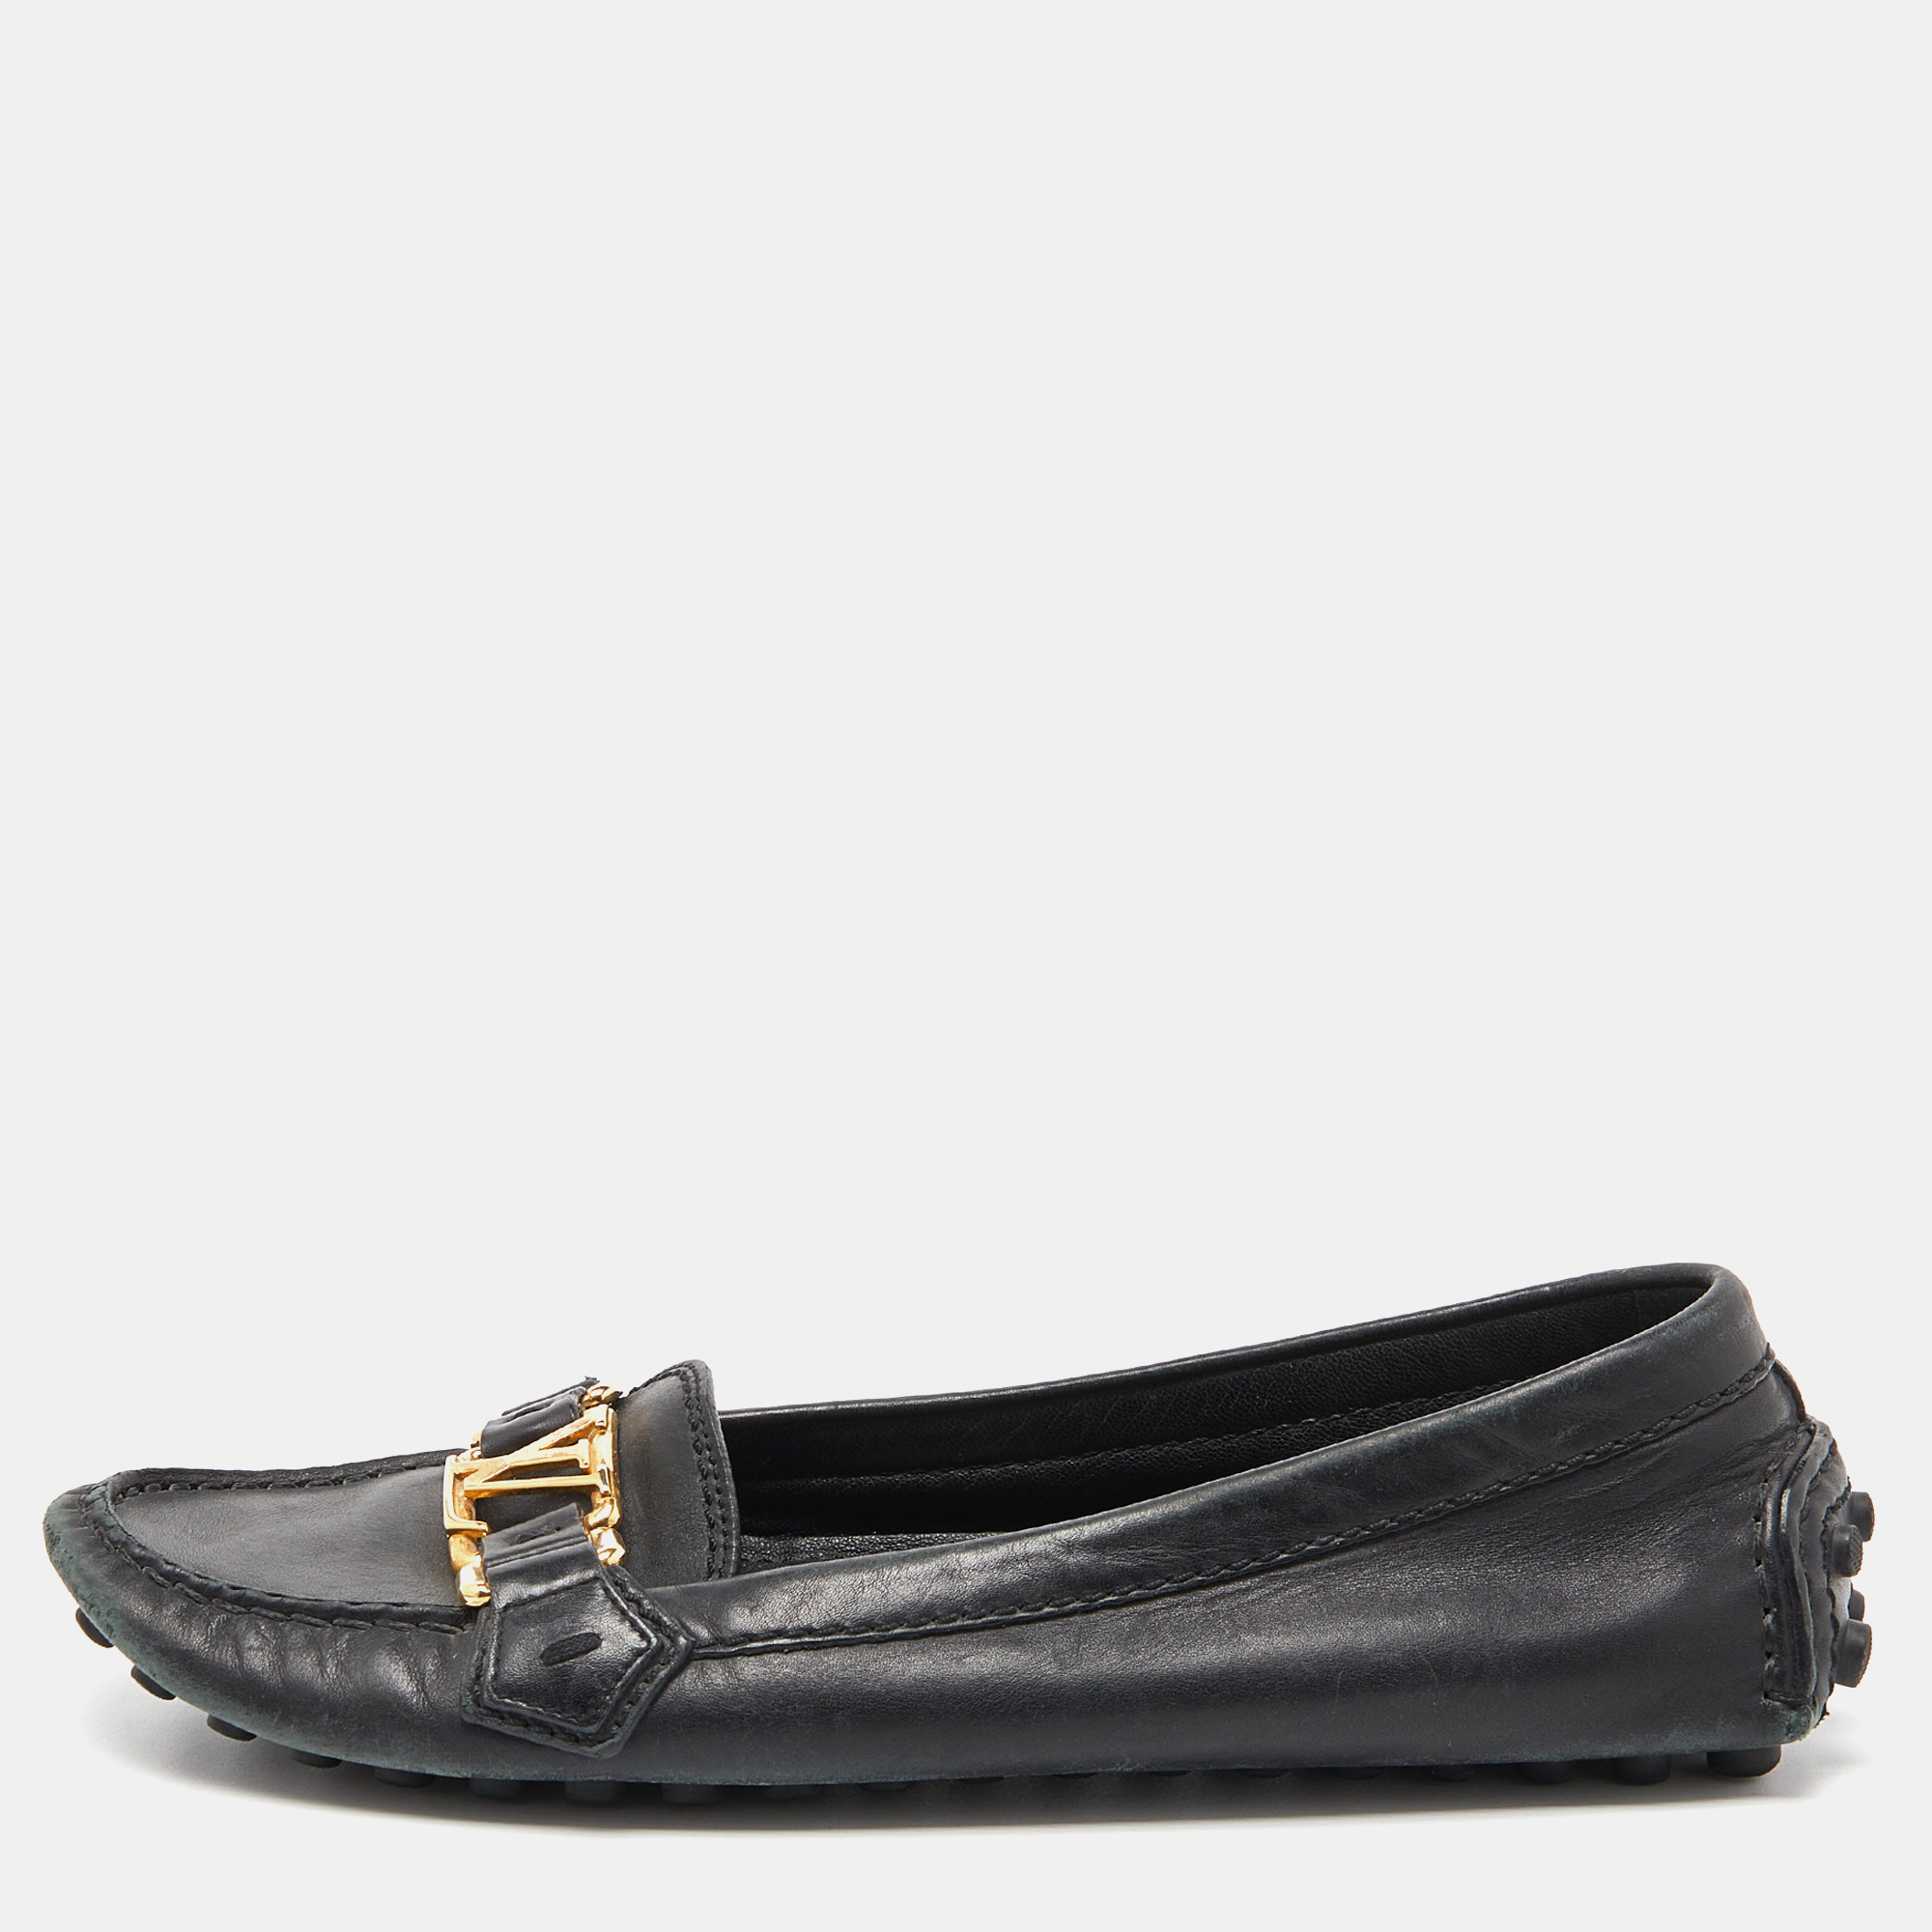 Pre-owned Louis Vuitton Black Leather Oxford Loafers Size 36